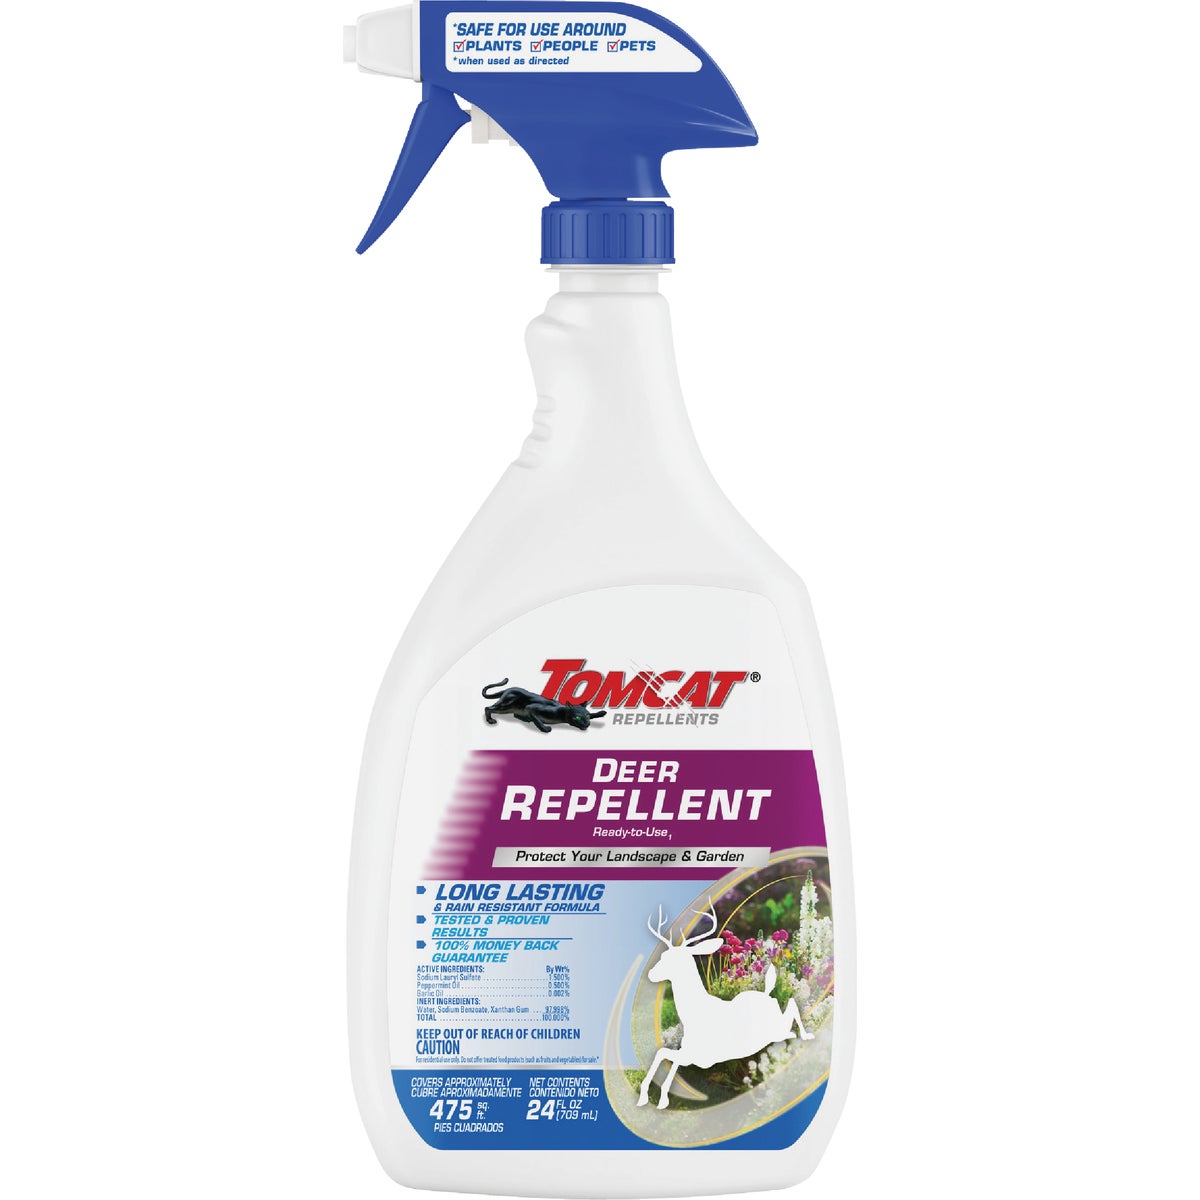 Item 701274, No stink formula deer repellent ideal for protecting gardens and 